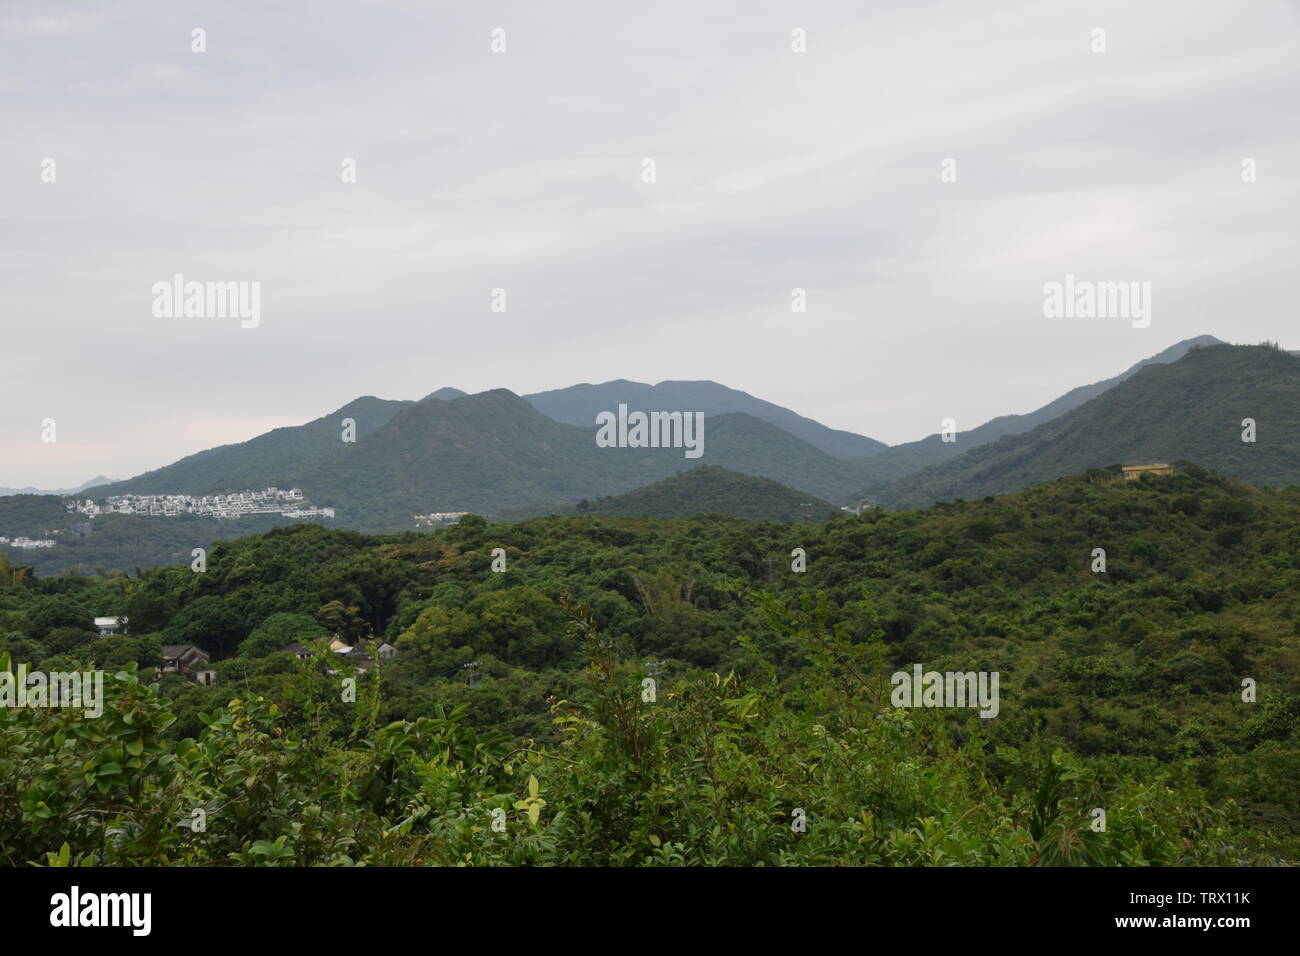 Graves on a hill in Hong Kong Stock Photo